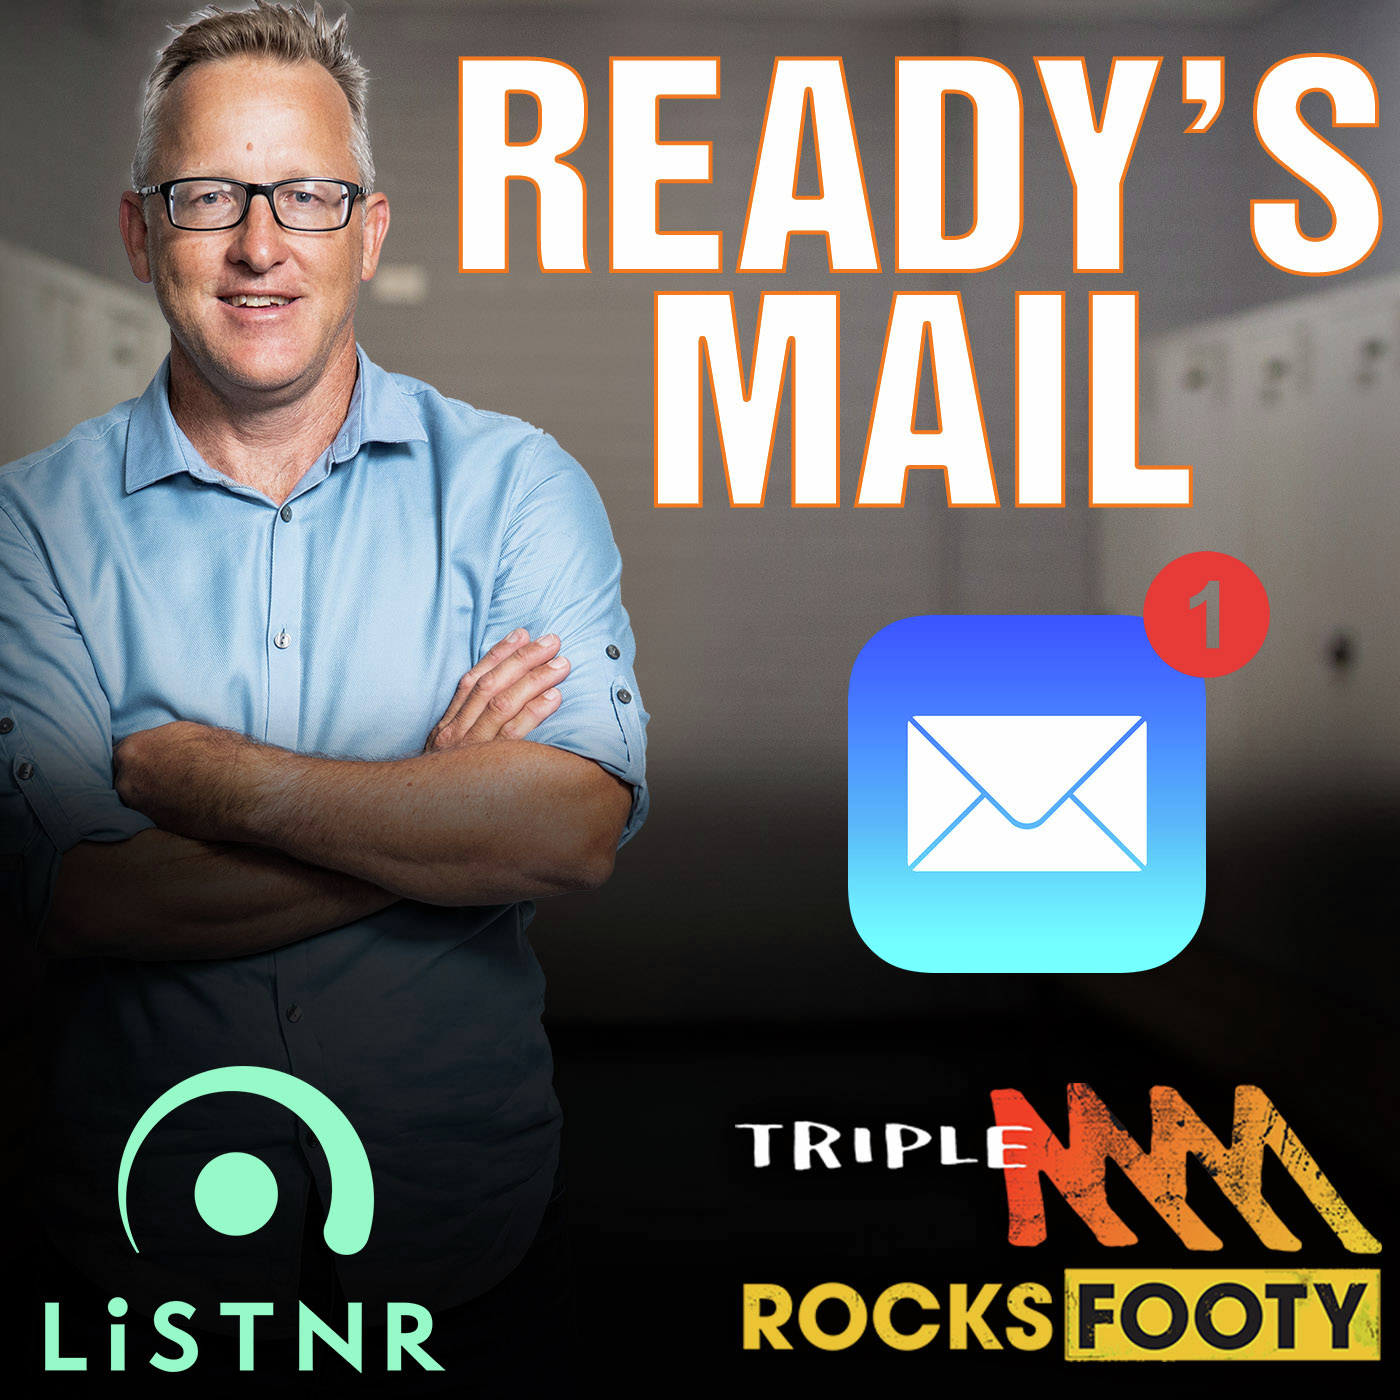 Ready's Mail | Sydney Roosters Duo's Future Up In The Air & Michael Cheika Not Giving Up On NRL Dream